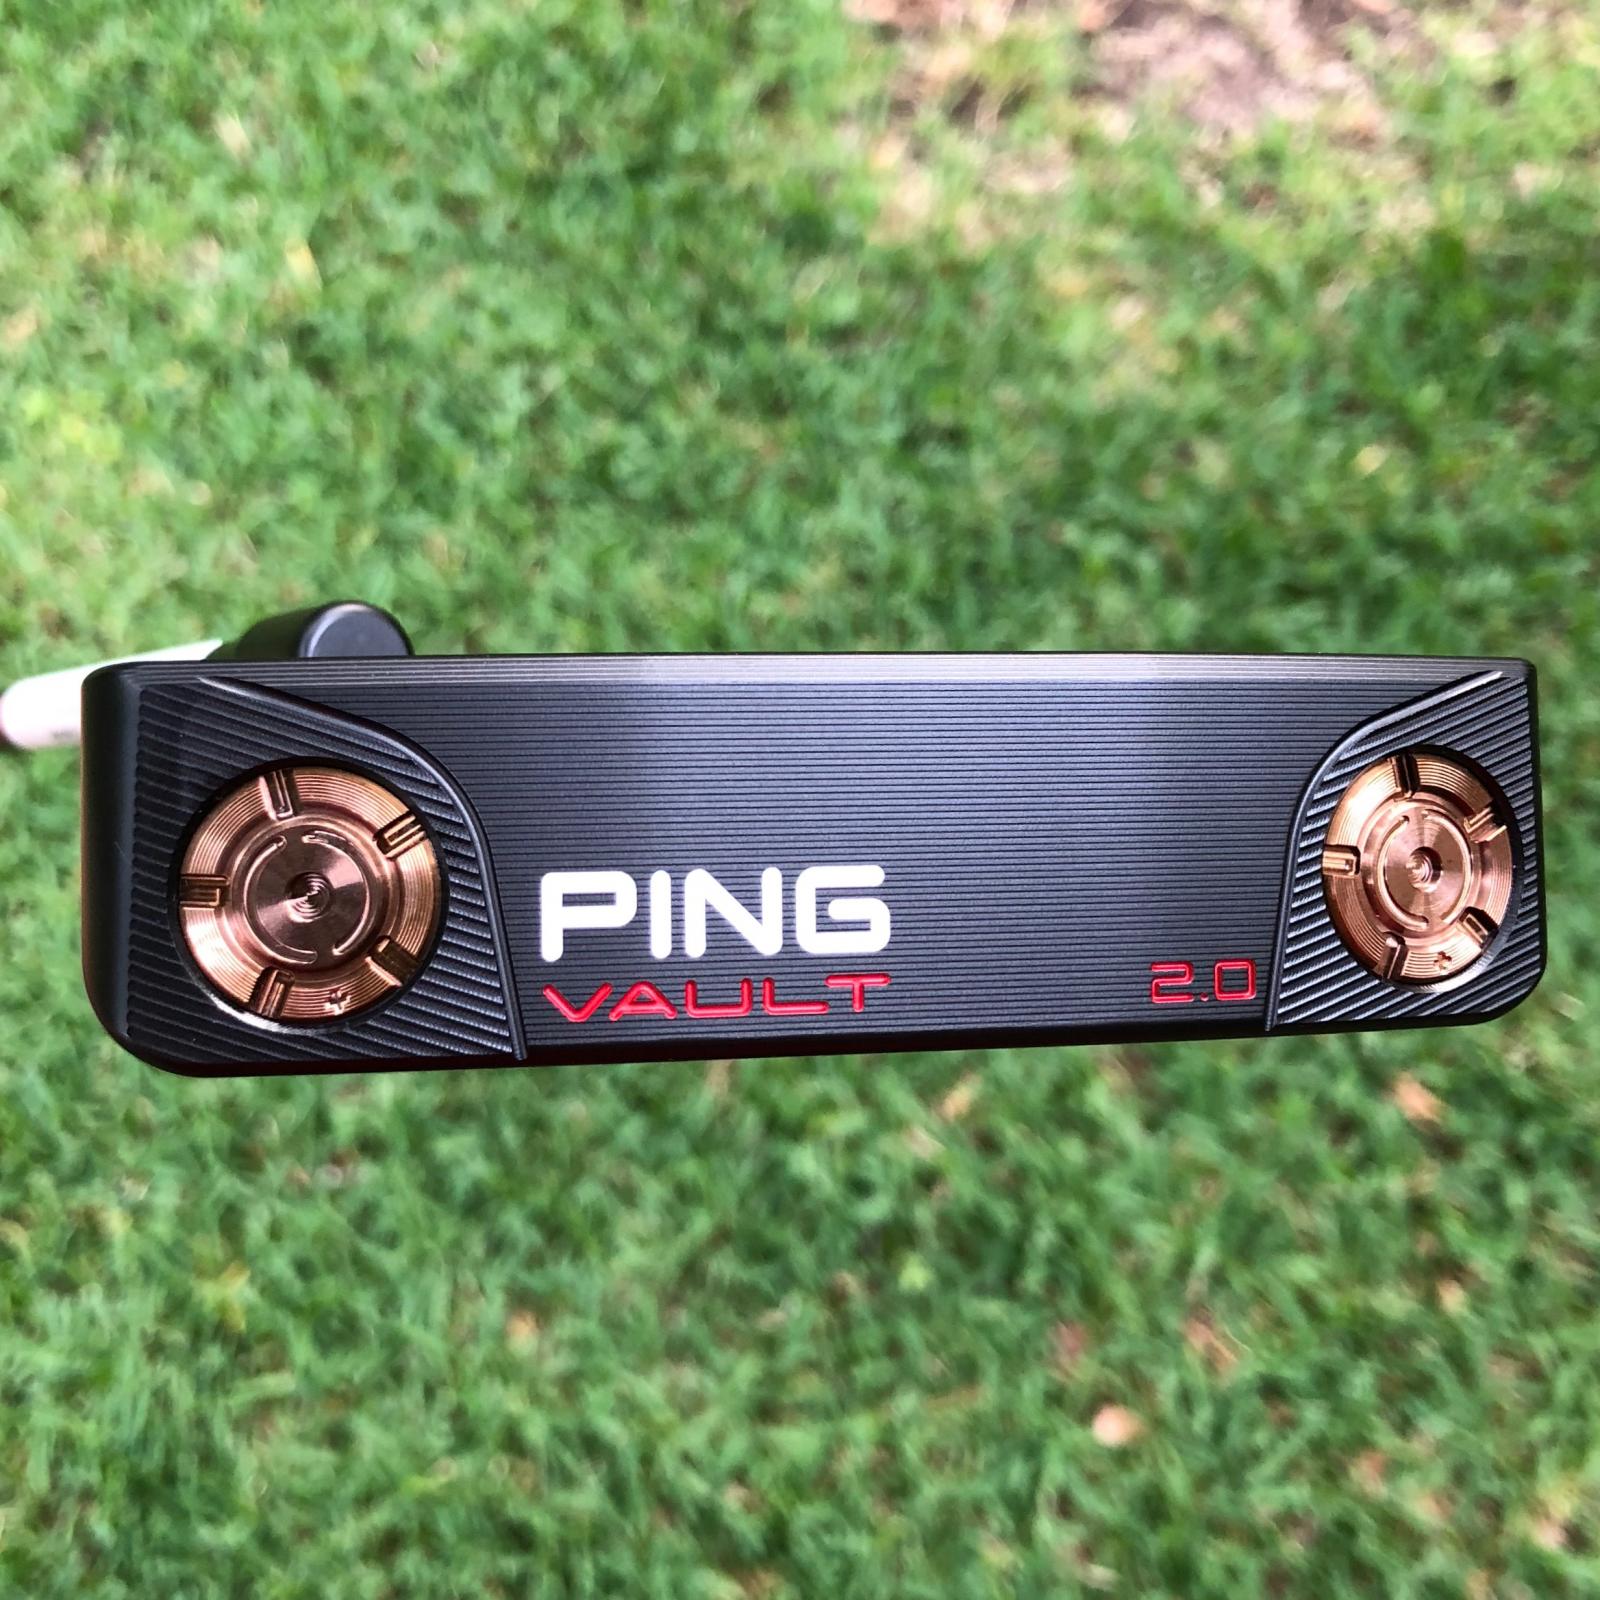 Ping Vault 2.0 Dale Anser - Putters - MyGolfSpy Forum